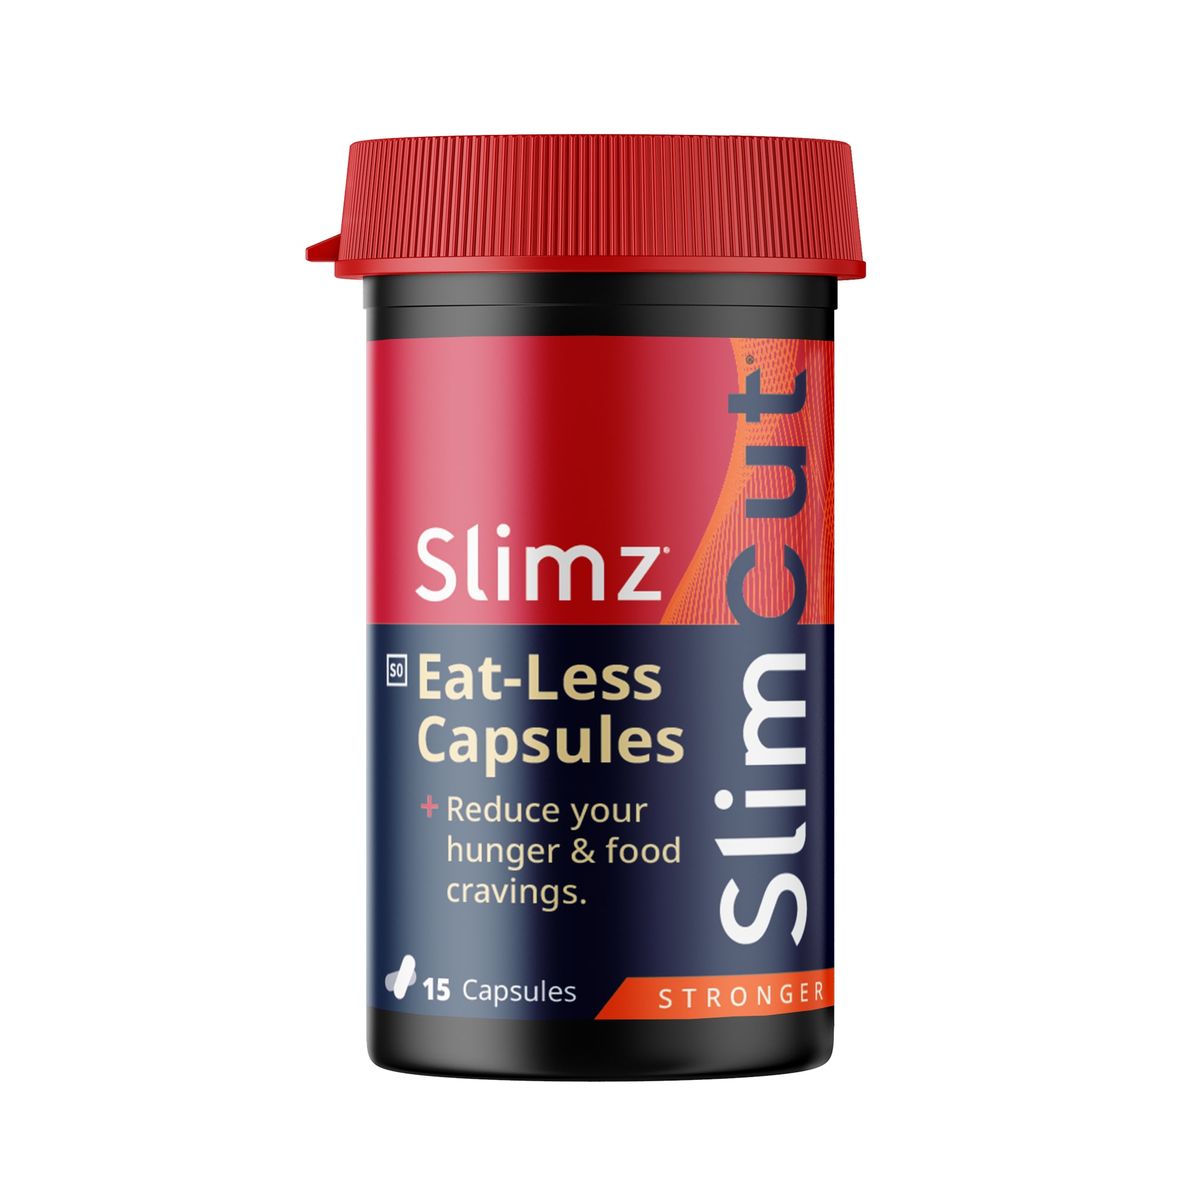 Slimz Slim Cut Stronger Pre-Workout 160g, Shop Today. Get it Tomorrow!